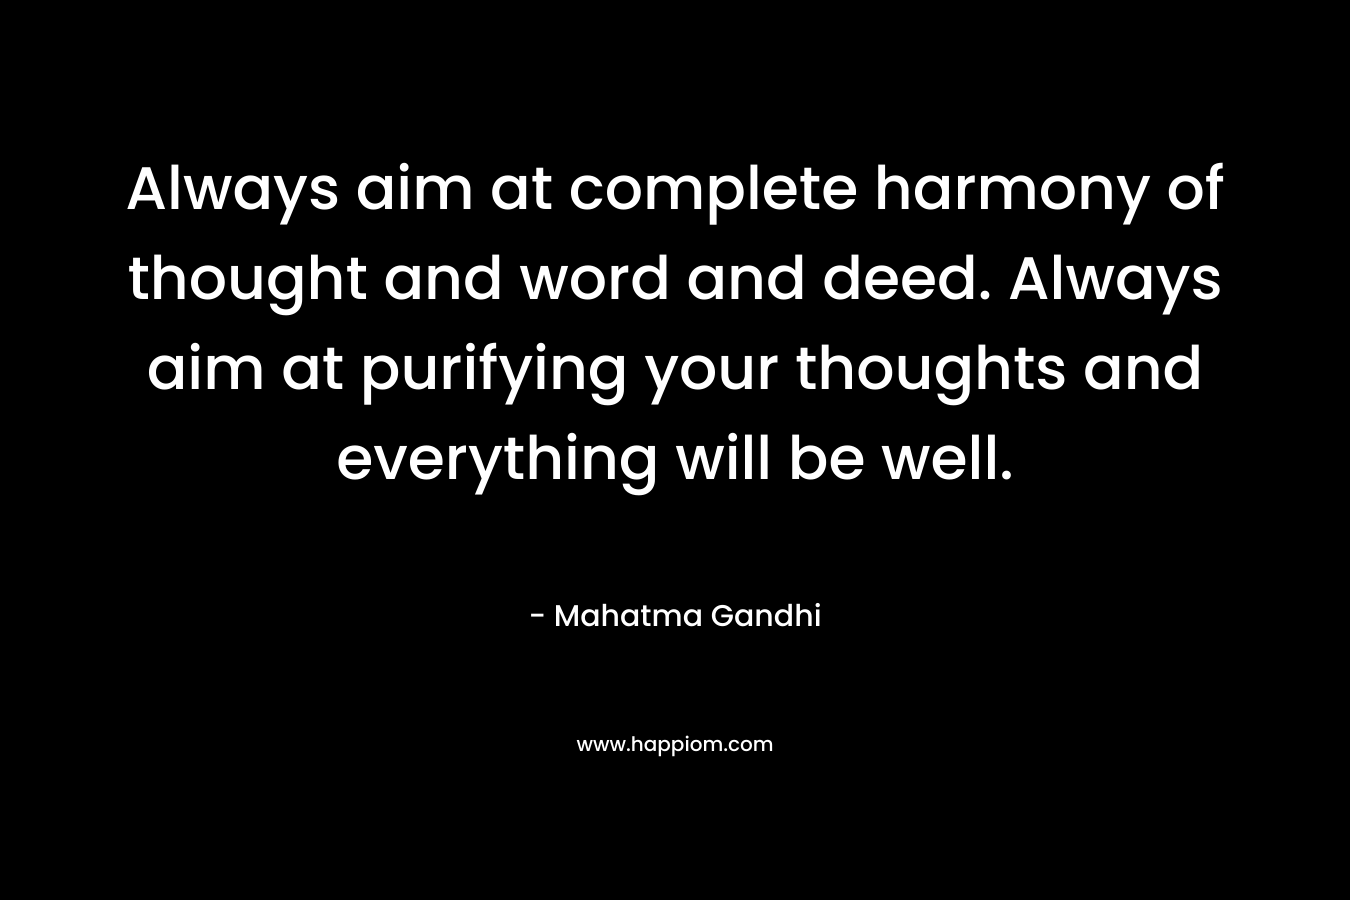 Always aim at complete harmony of thought and word and deed. Always aim at purifying your thoughts and everything will be well.